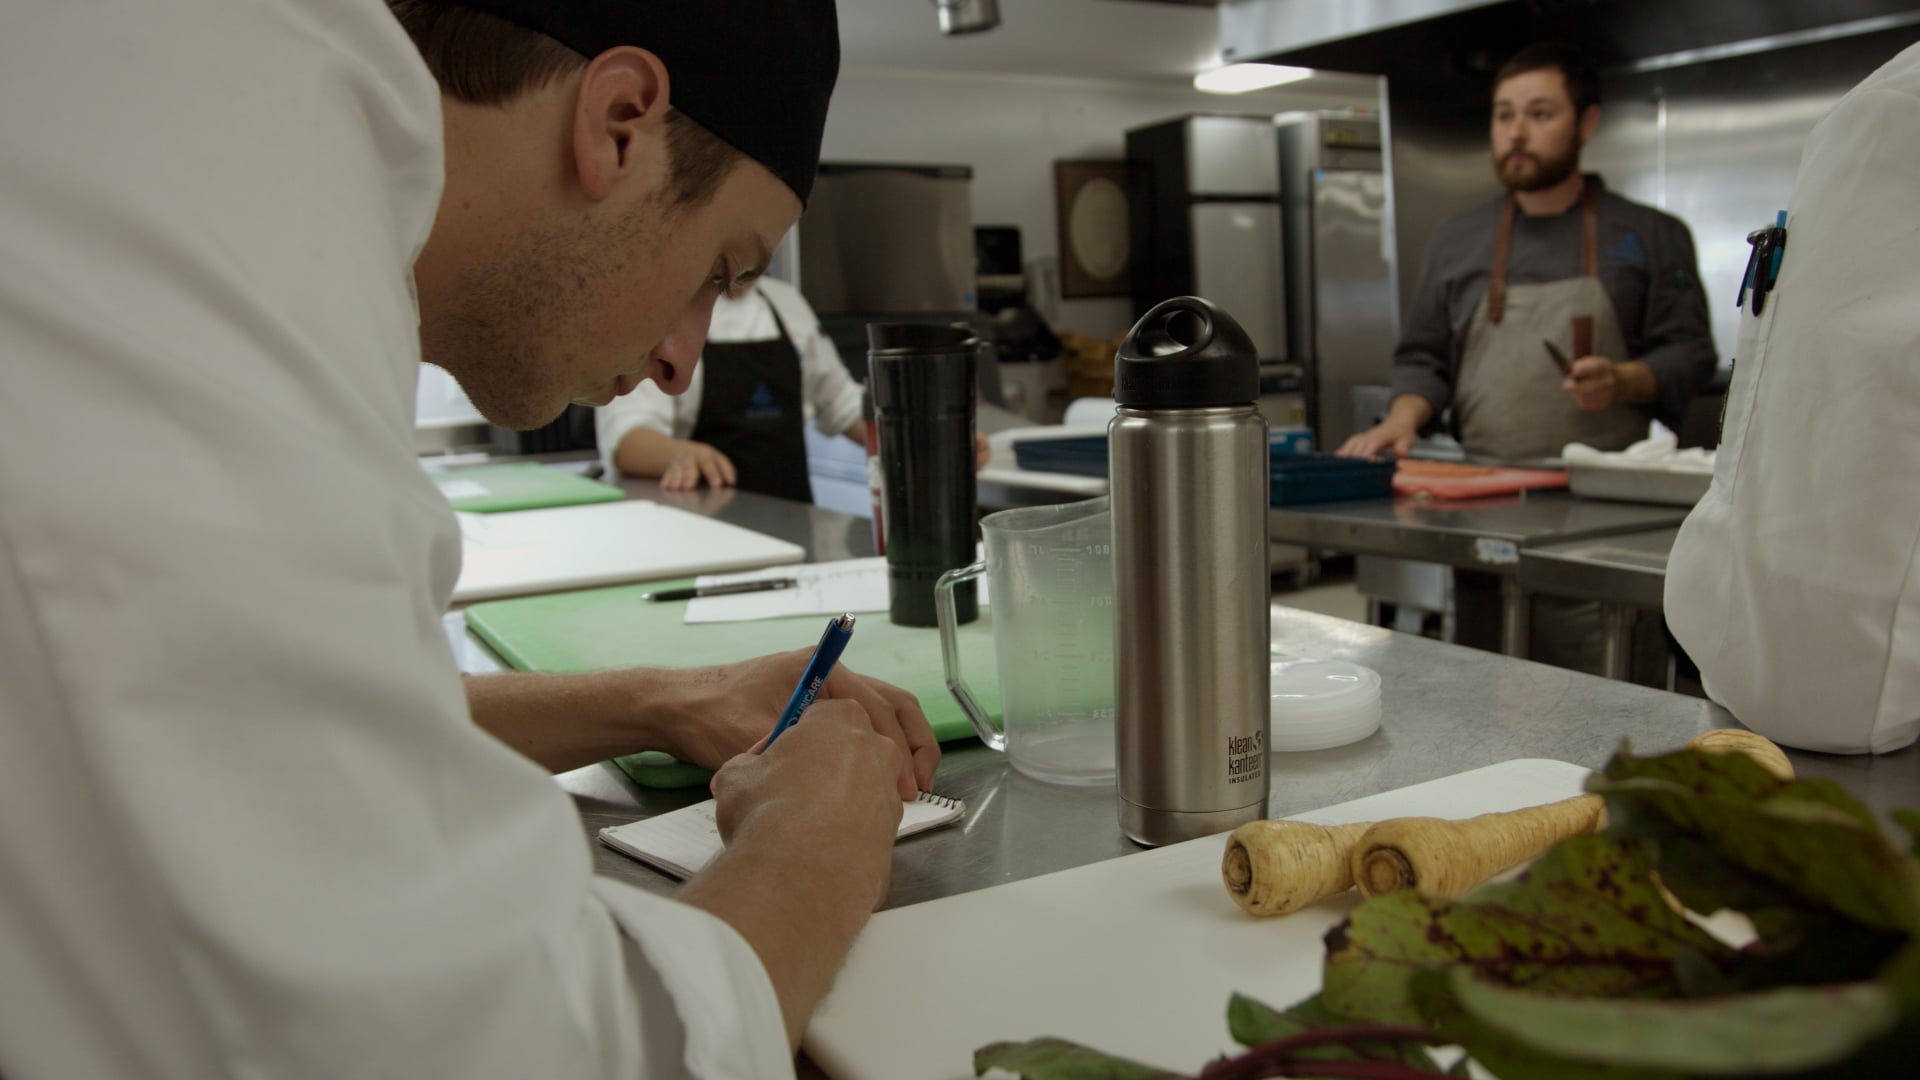 Les Cheneaux Culinary School - Excerpts